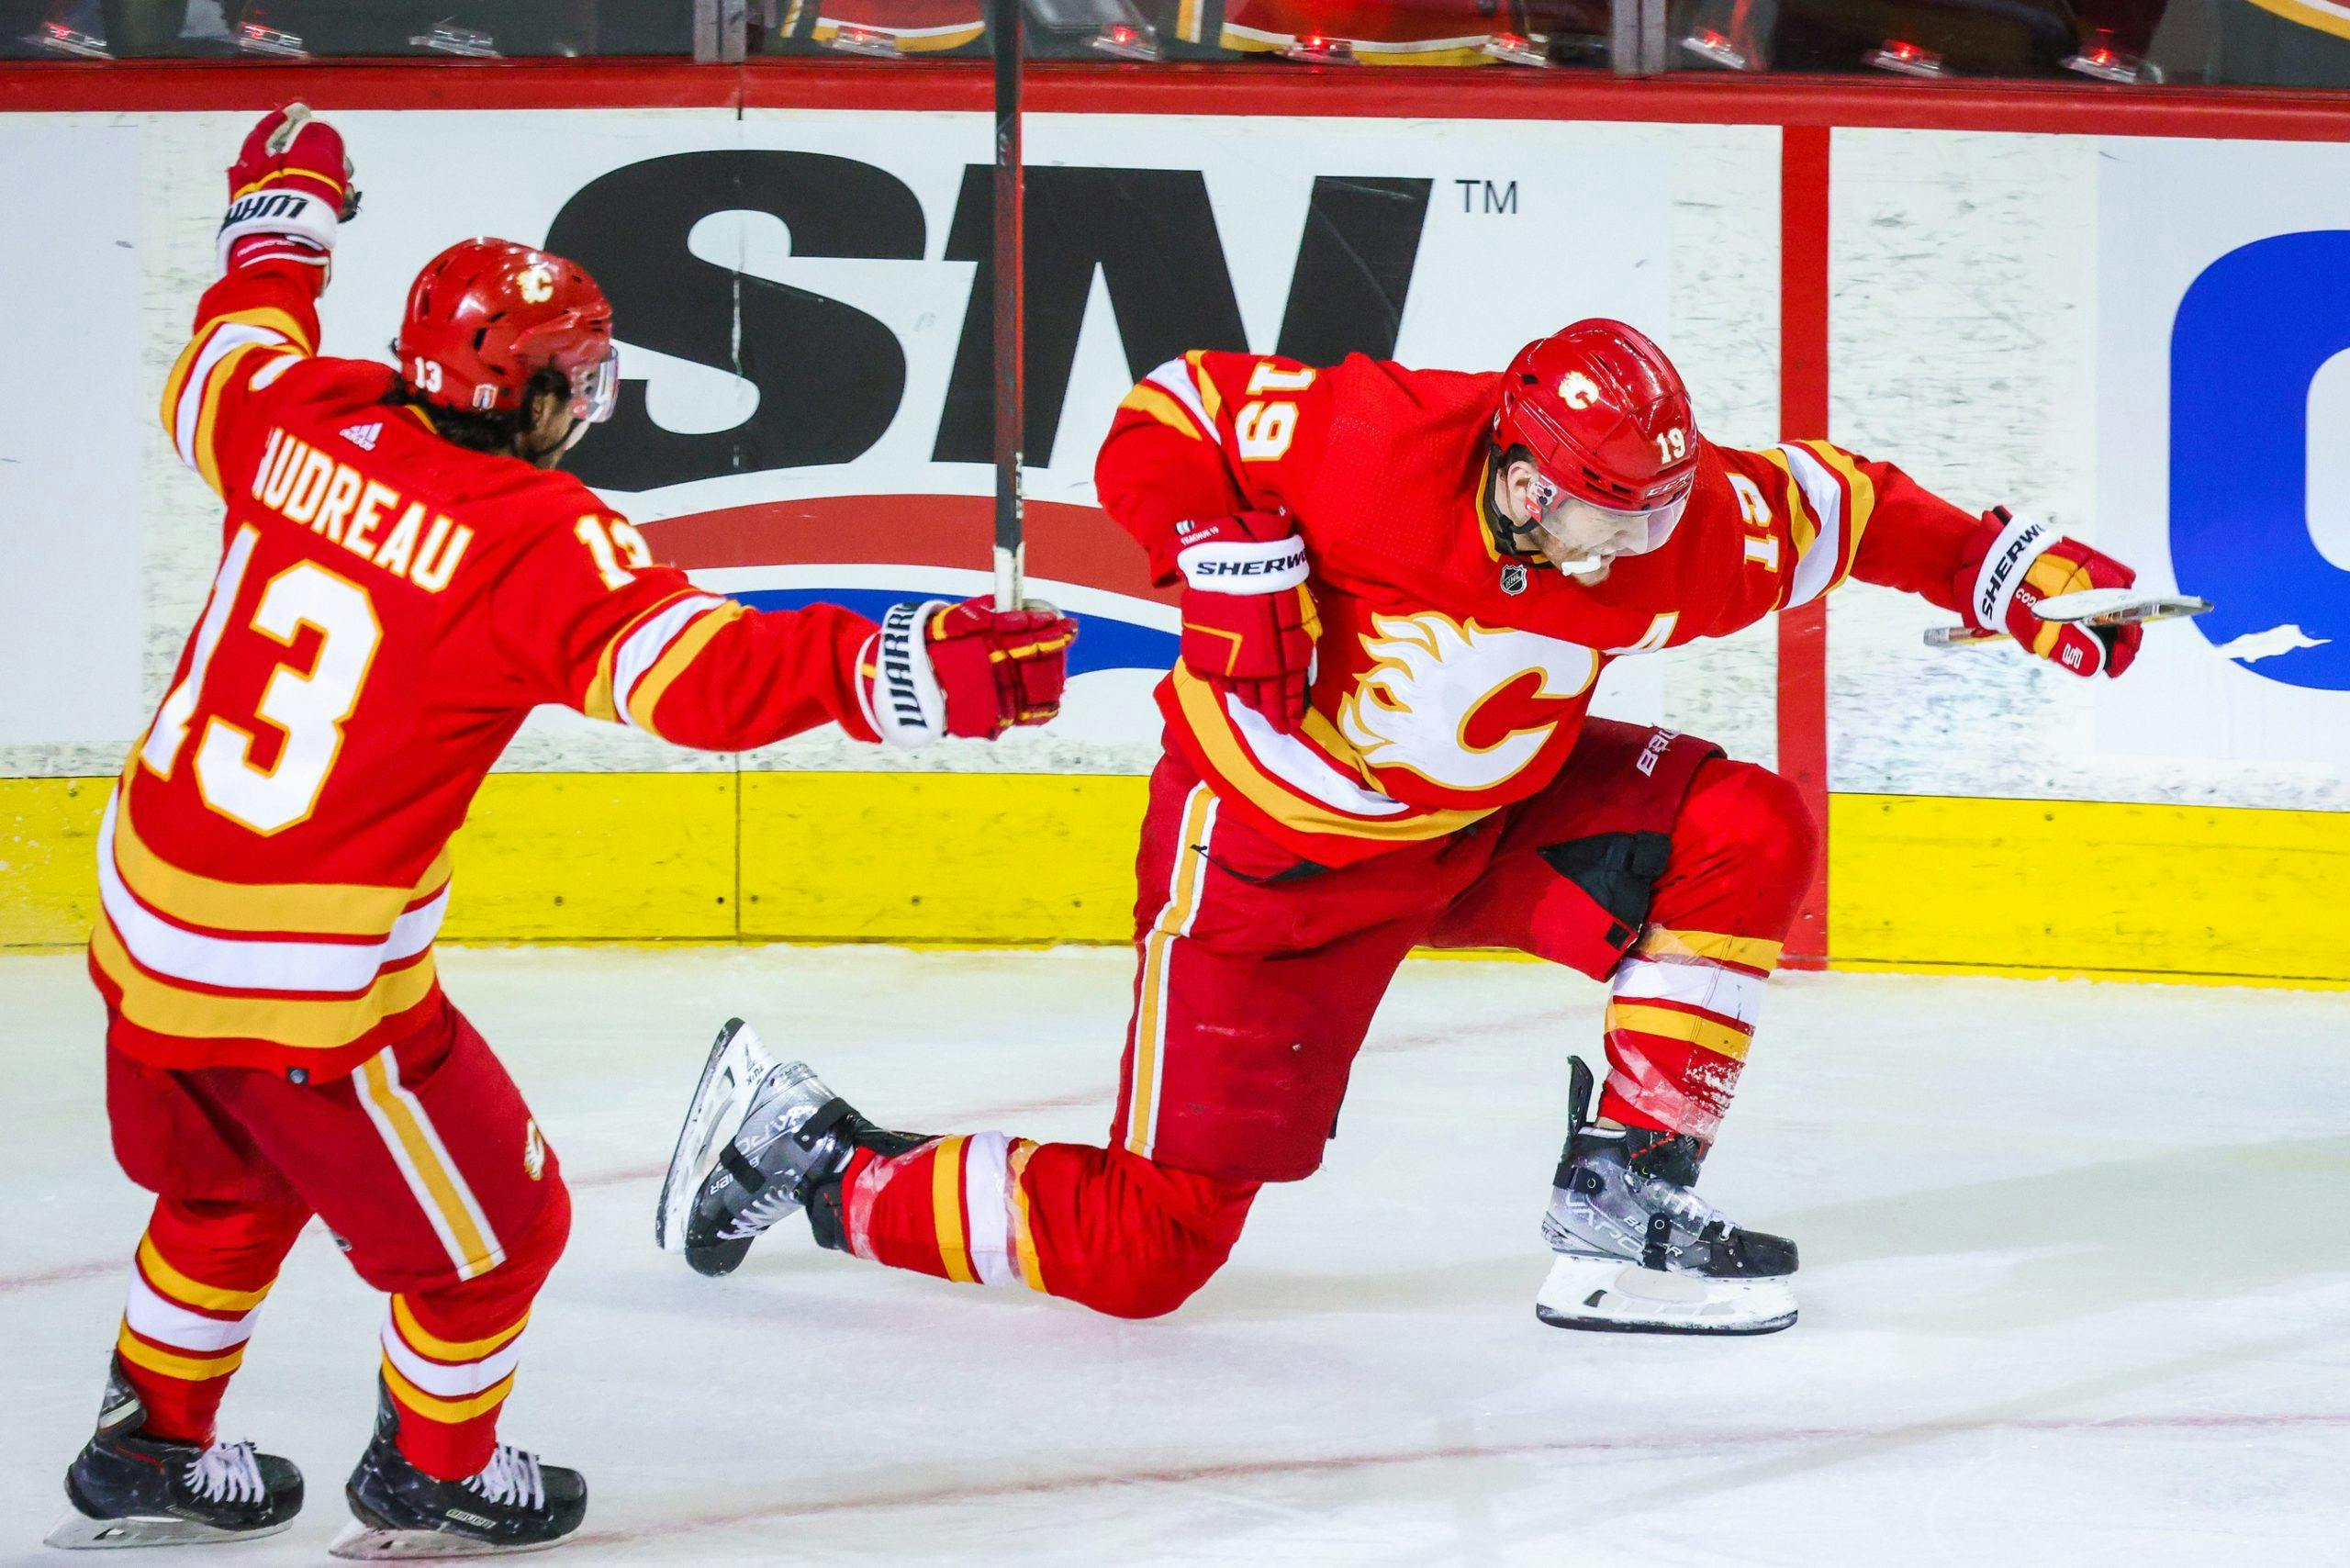 Stanley Cup Playoffs: Jets vs. Flames Game 2 start time, live stream